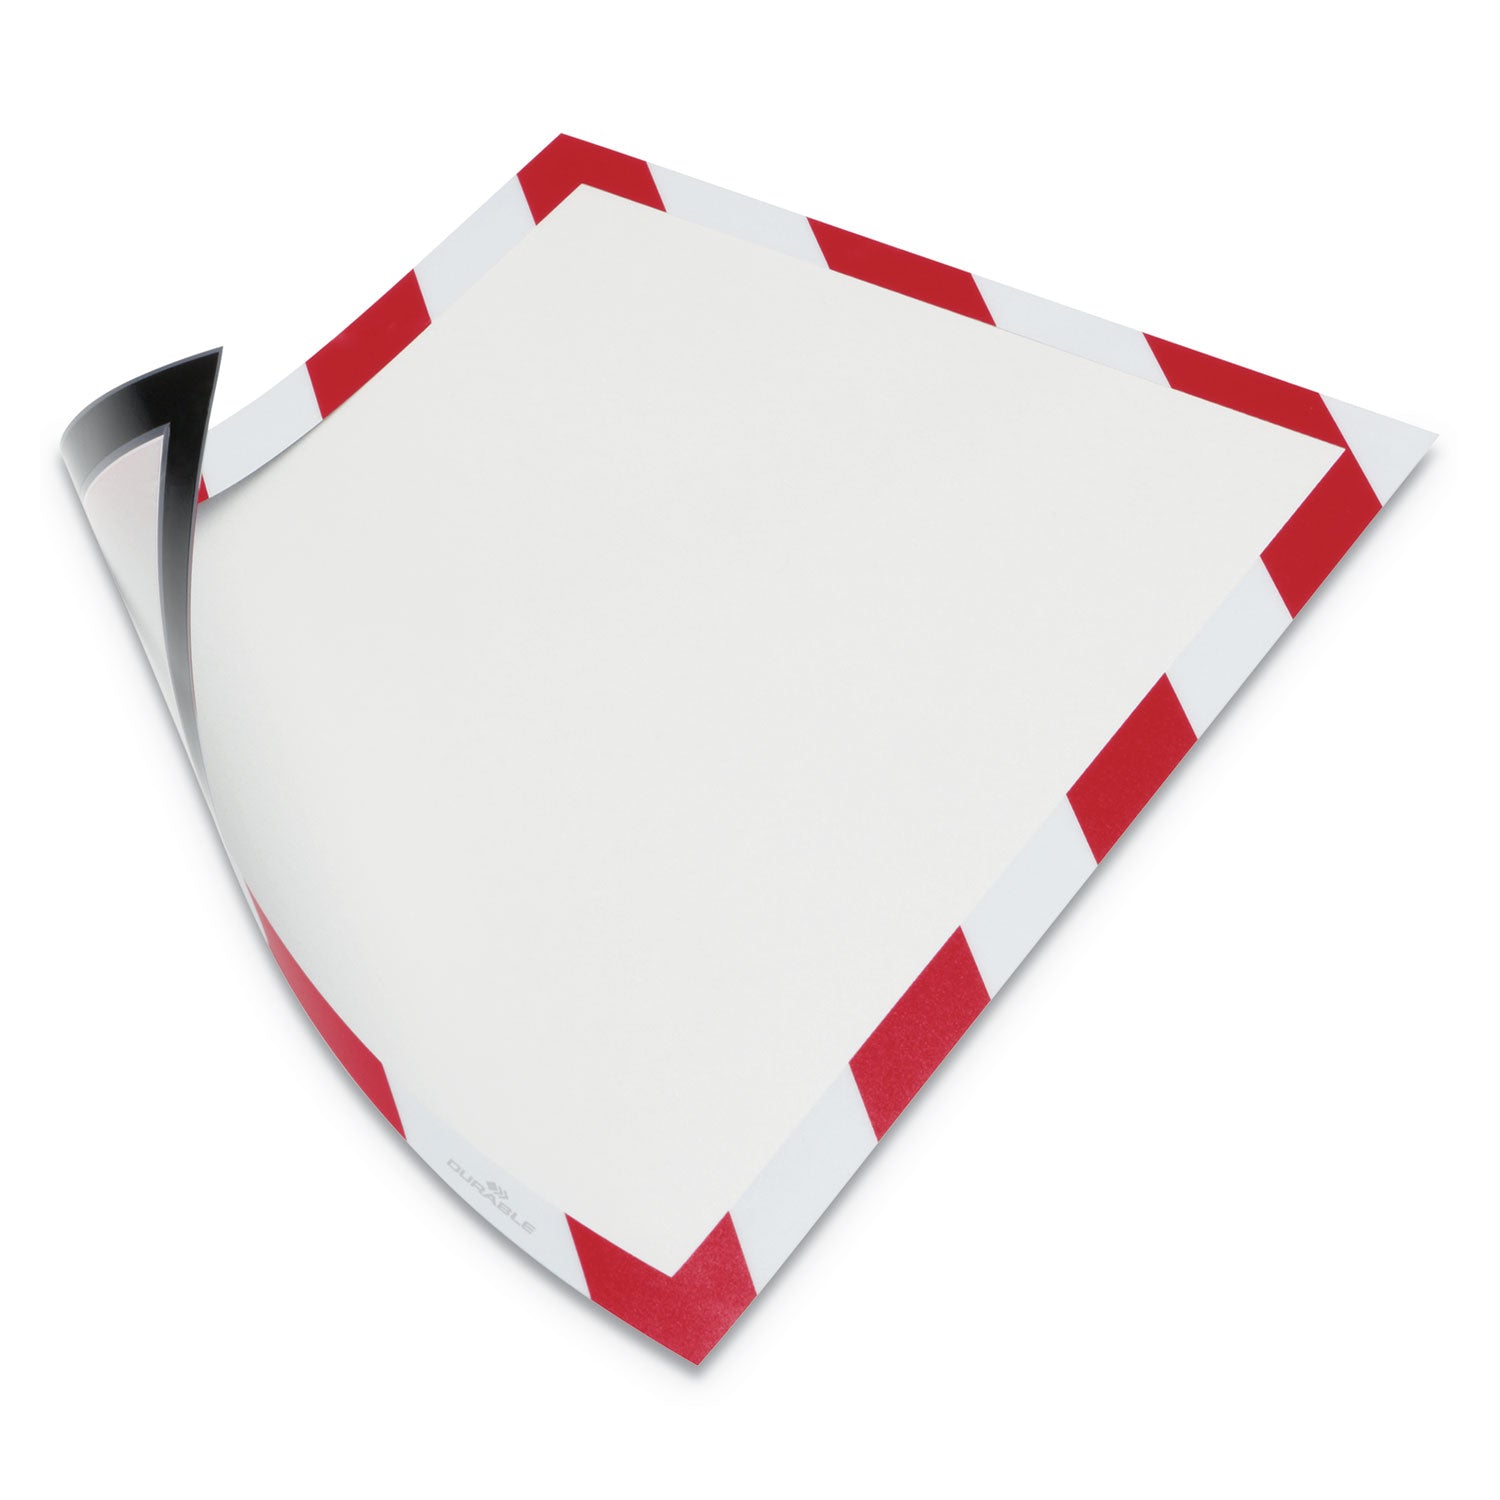 duraframe-security-magnetic-sign-holder-85-x-11-red-white-frame-2-pack_dbl4772132 - 1